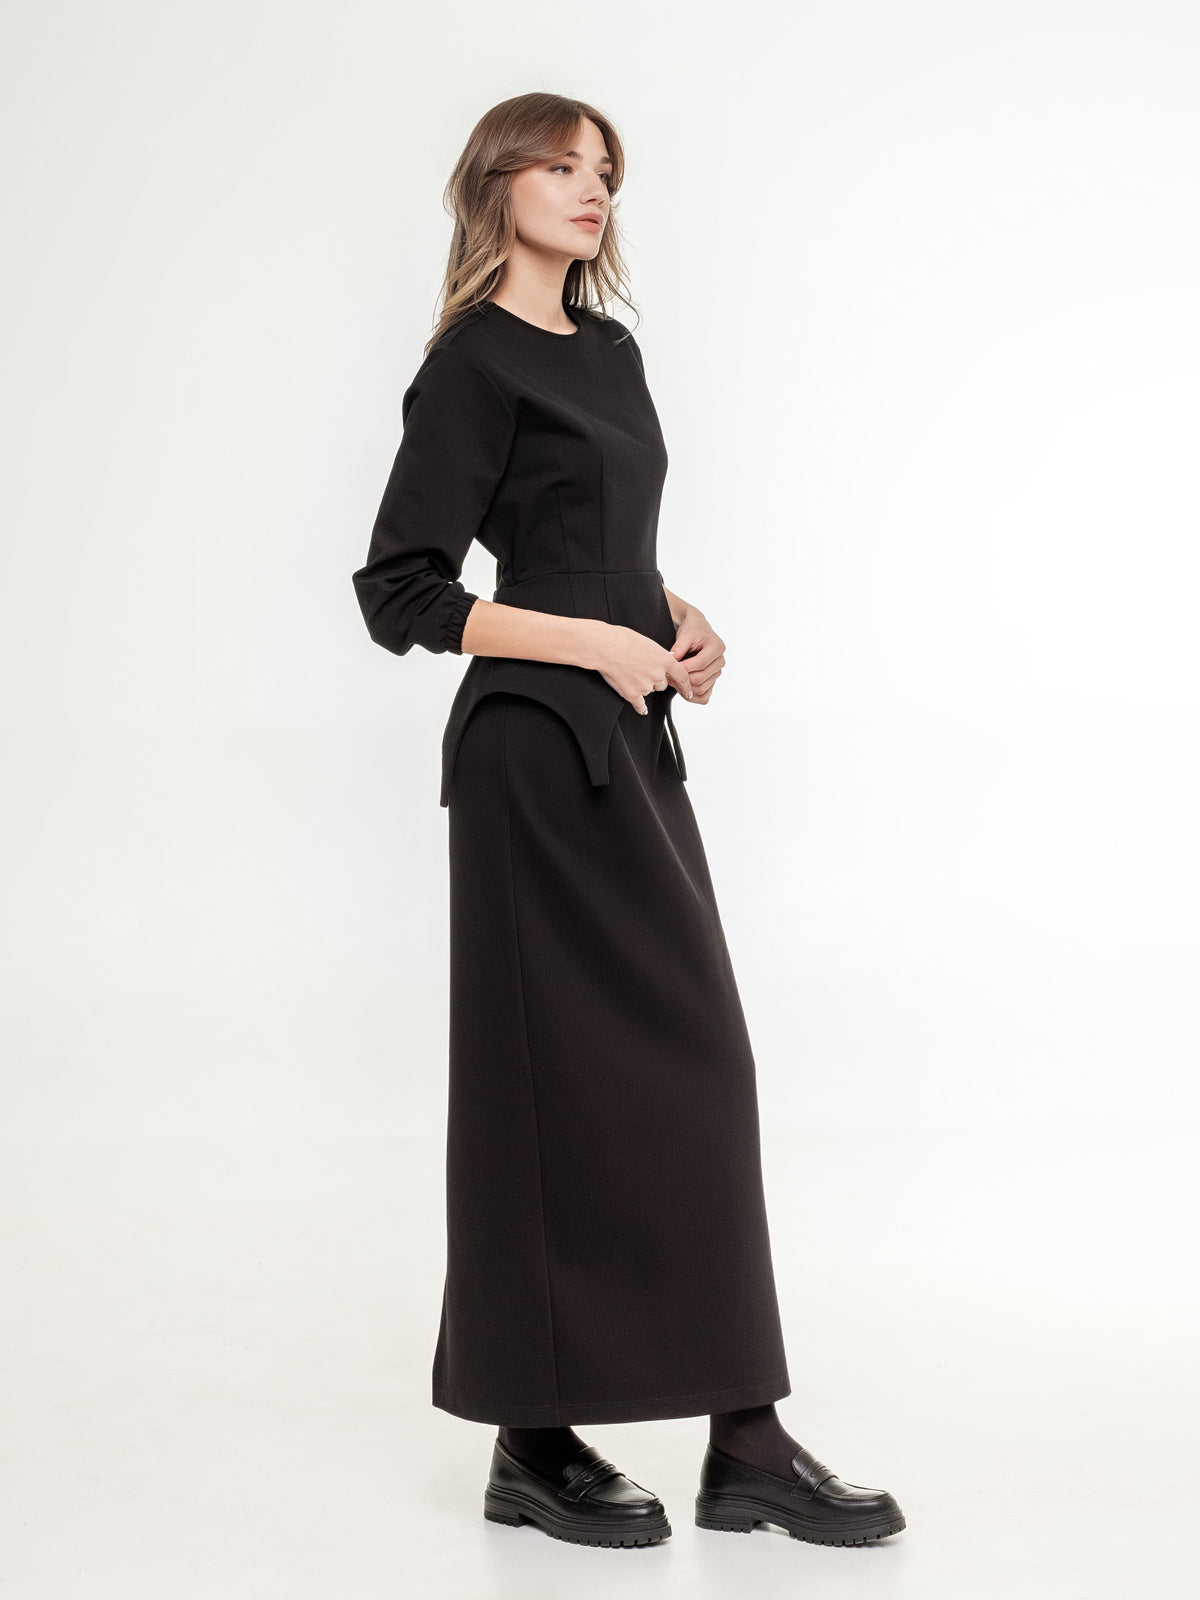 costume black top with long sleeve and long skirt another side view tight fit